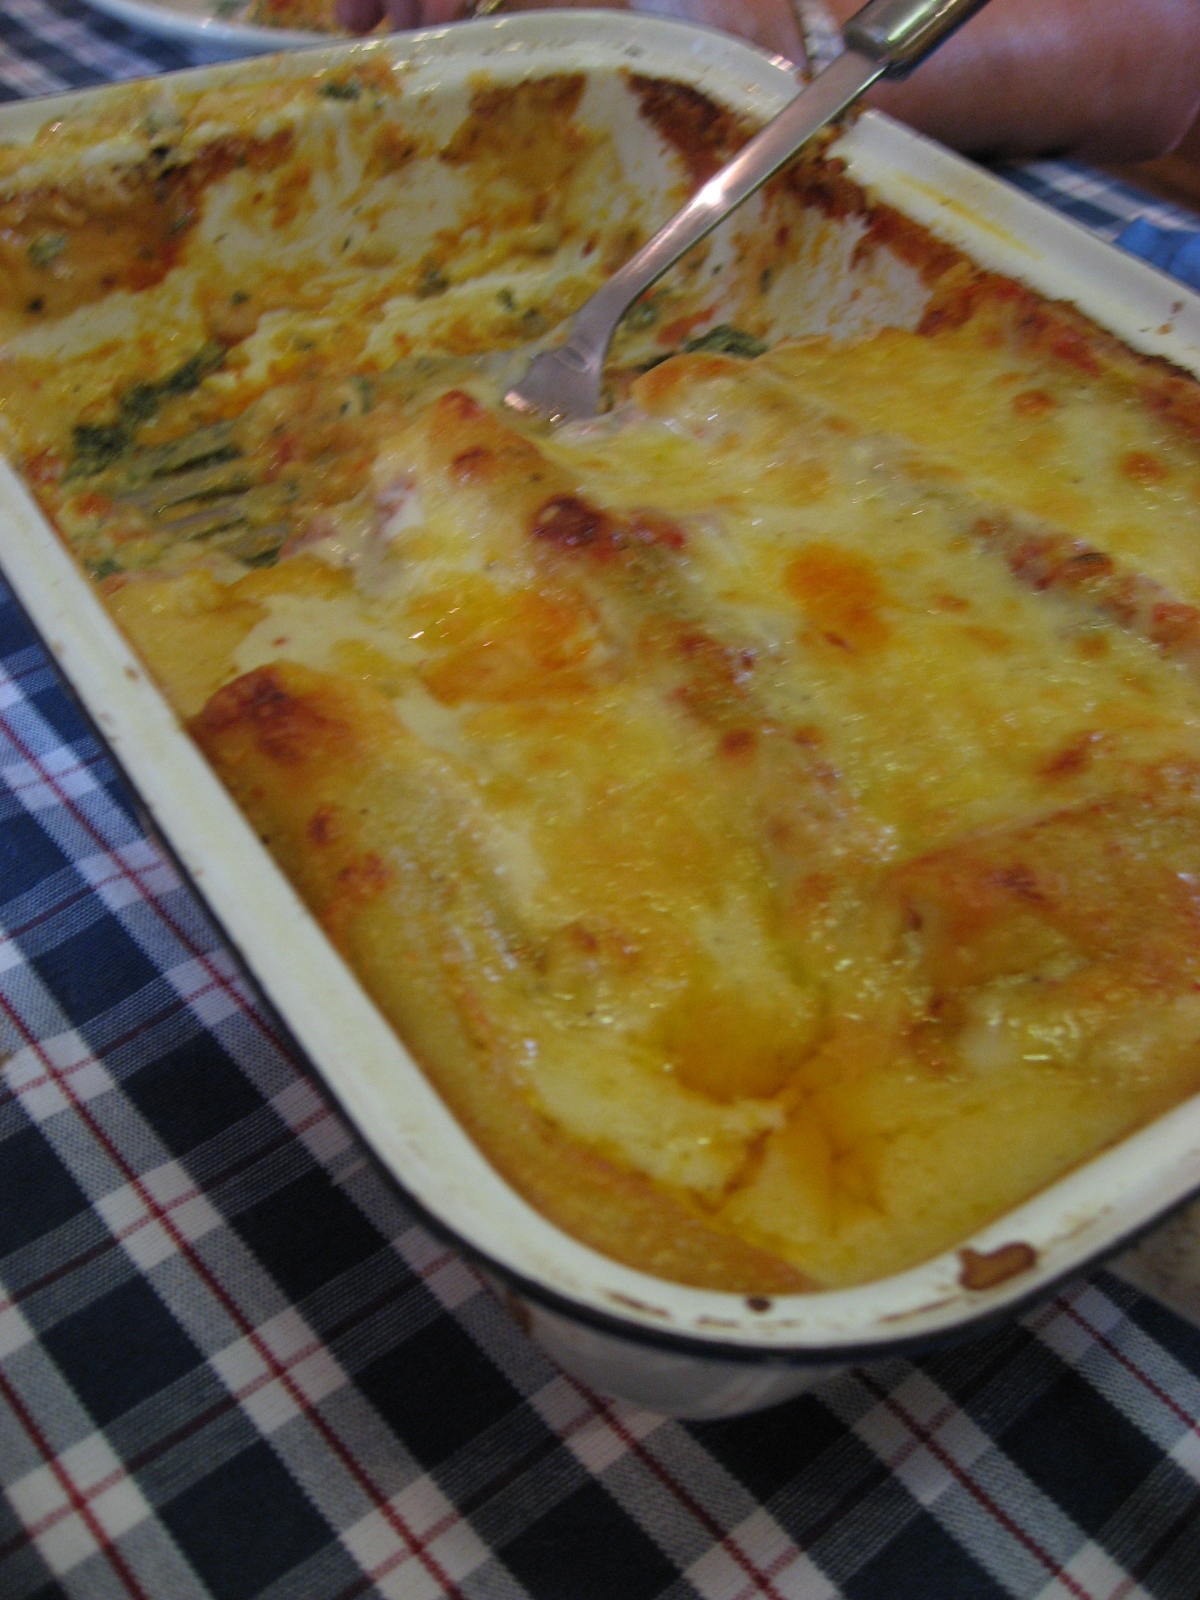 this dish is casserole made with cheese, meat and greens